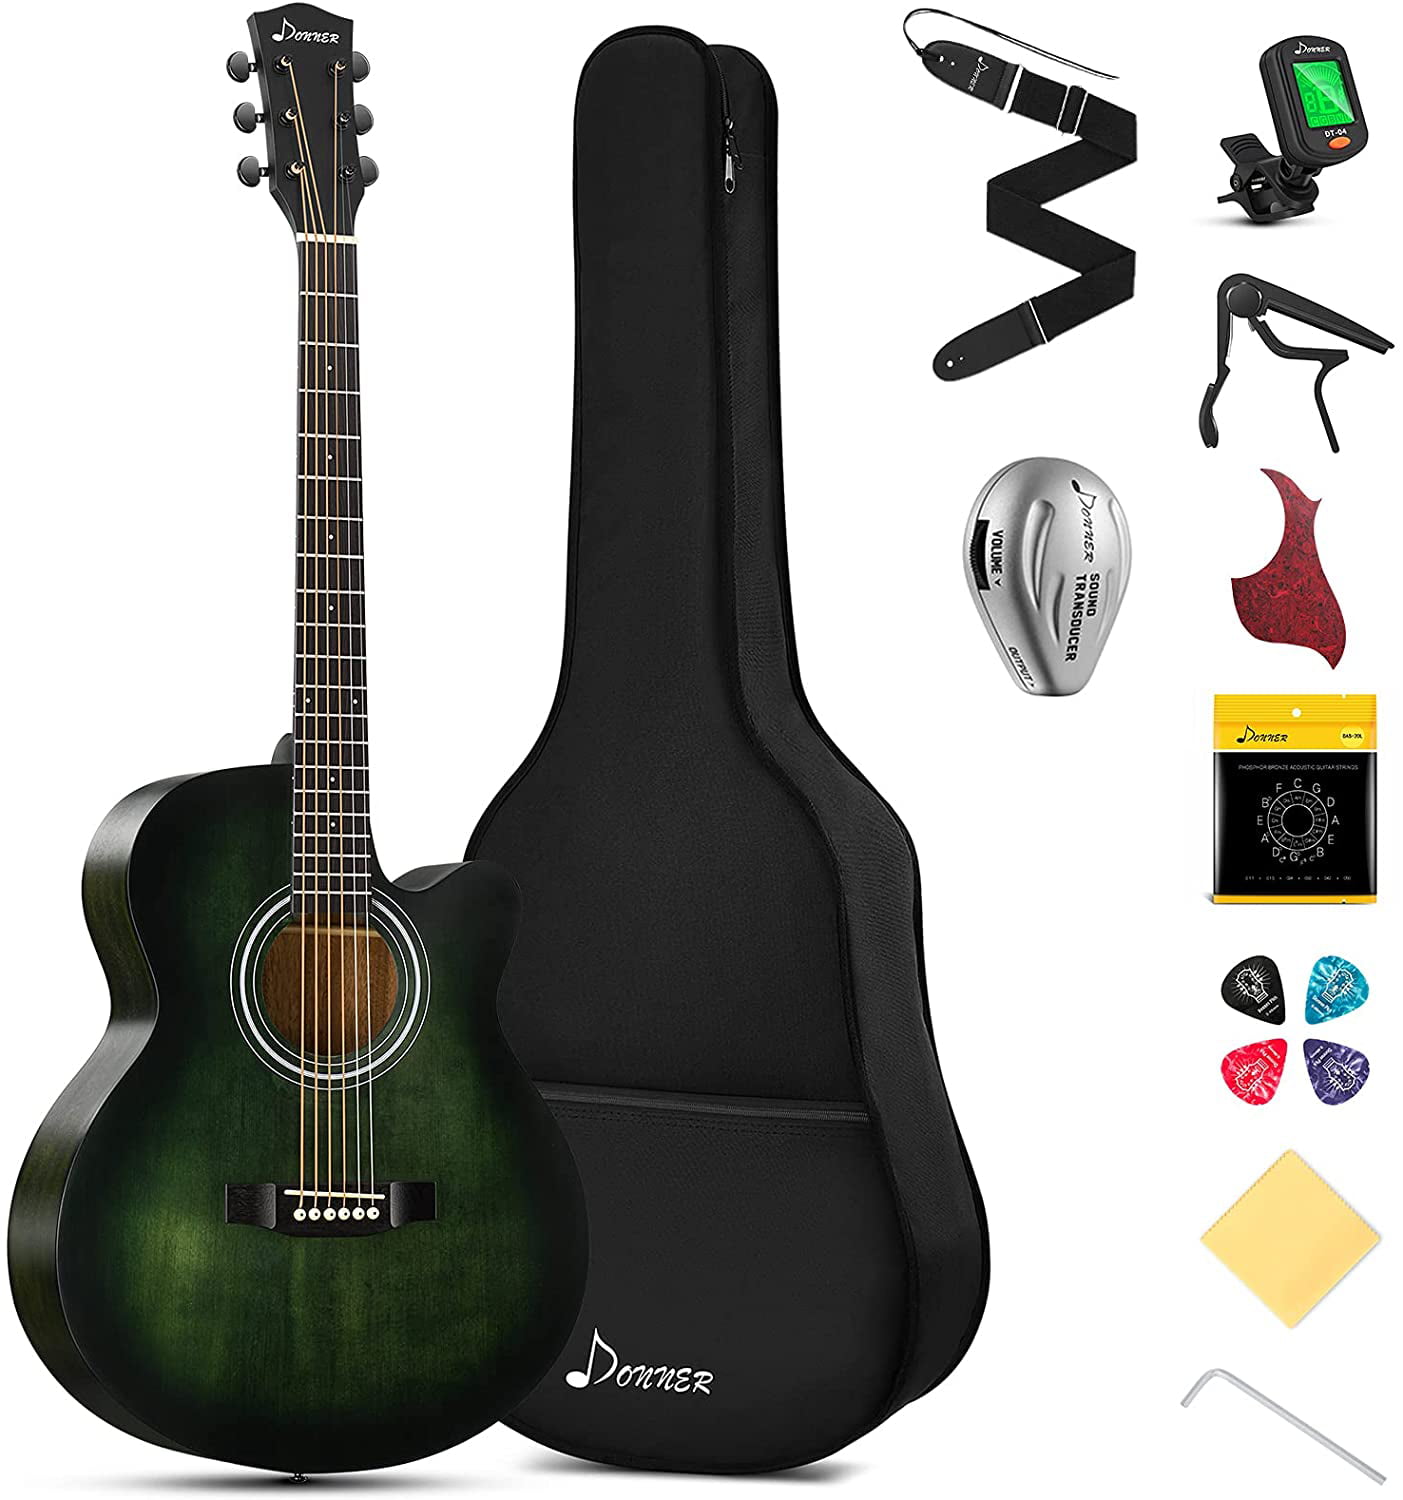 Acoustic Guitar Beginners 21 Inch Kids Children Musical Instrument with Guitar Pick and Strings 